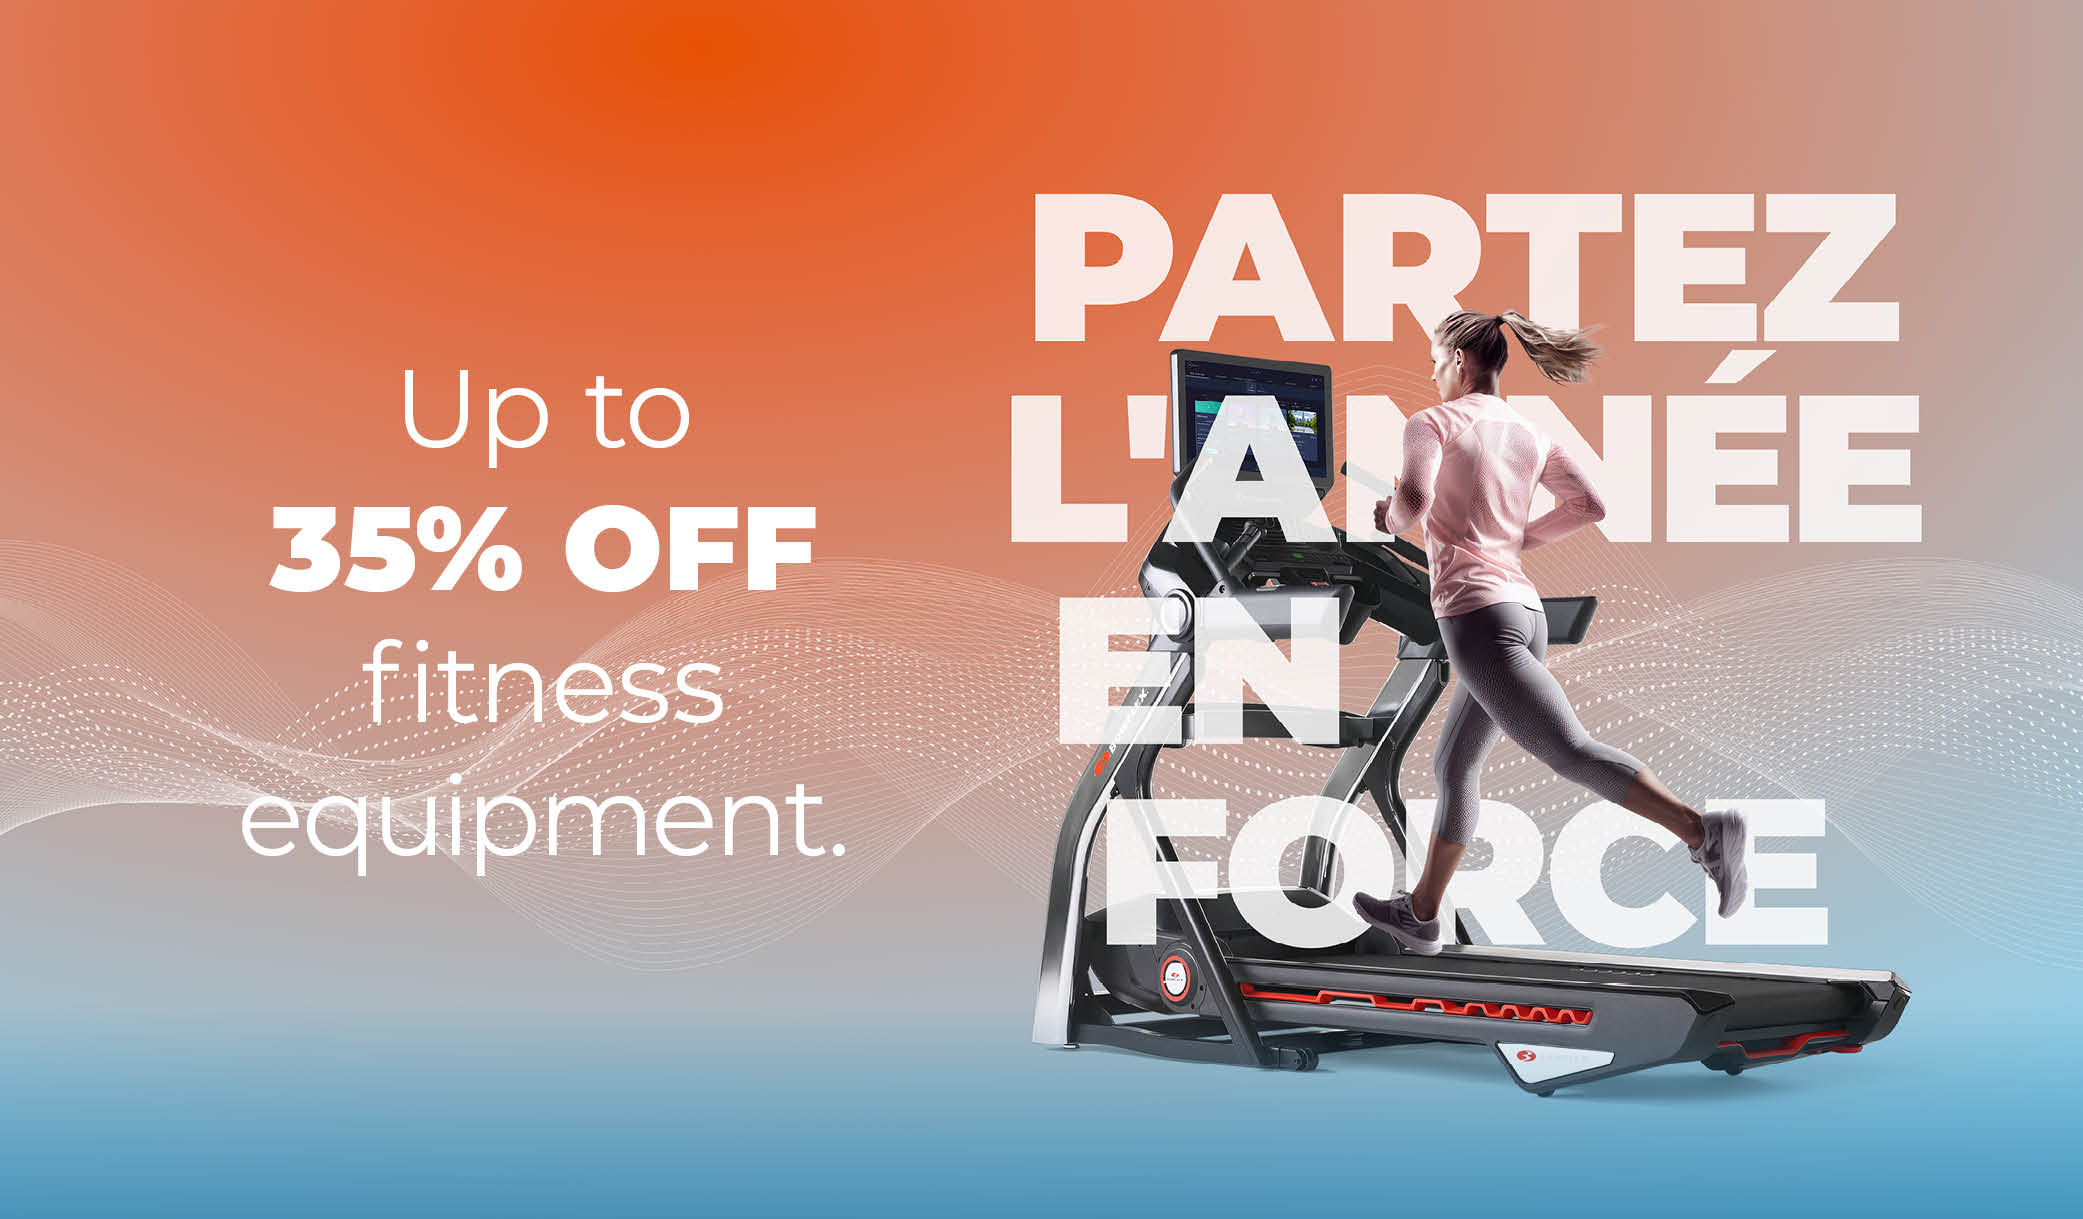 Up to 35% off fitness equipment